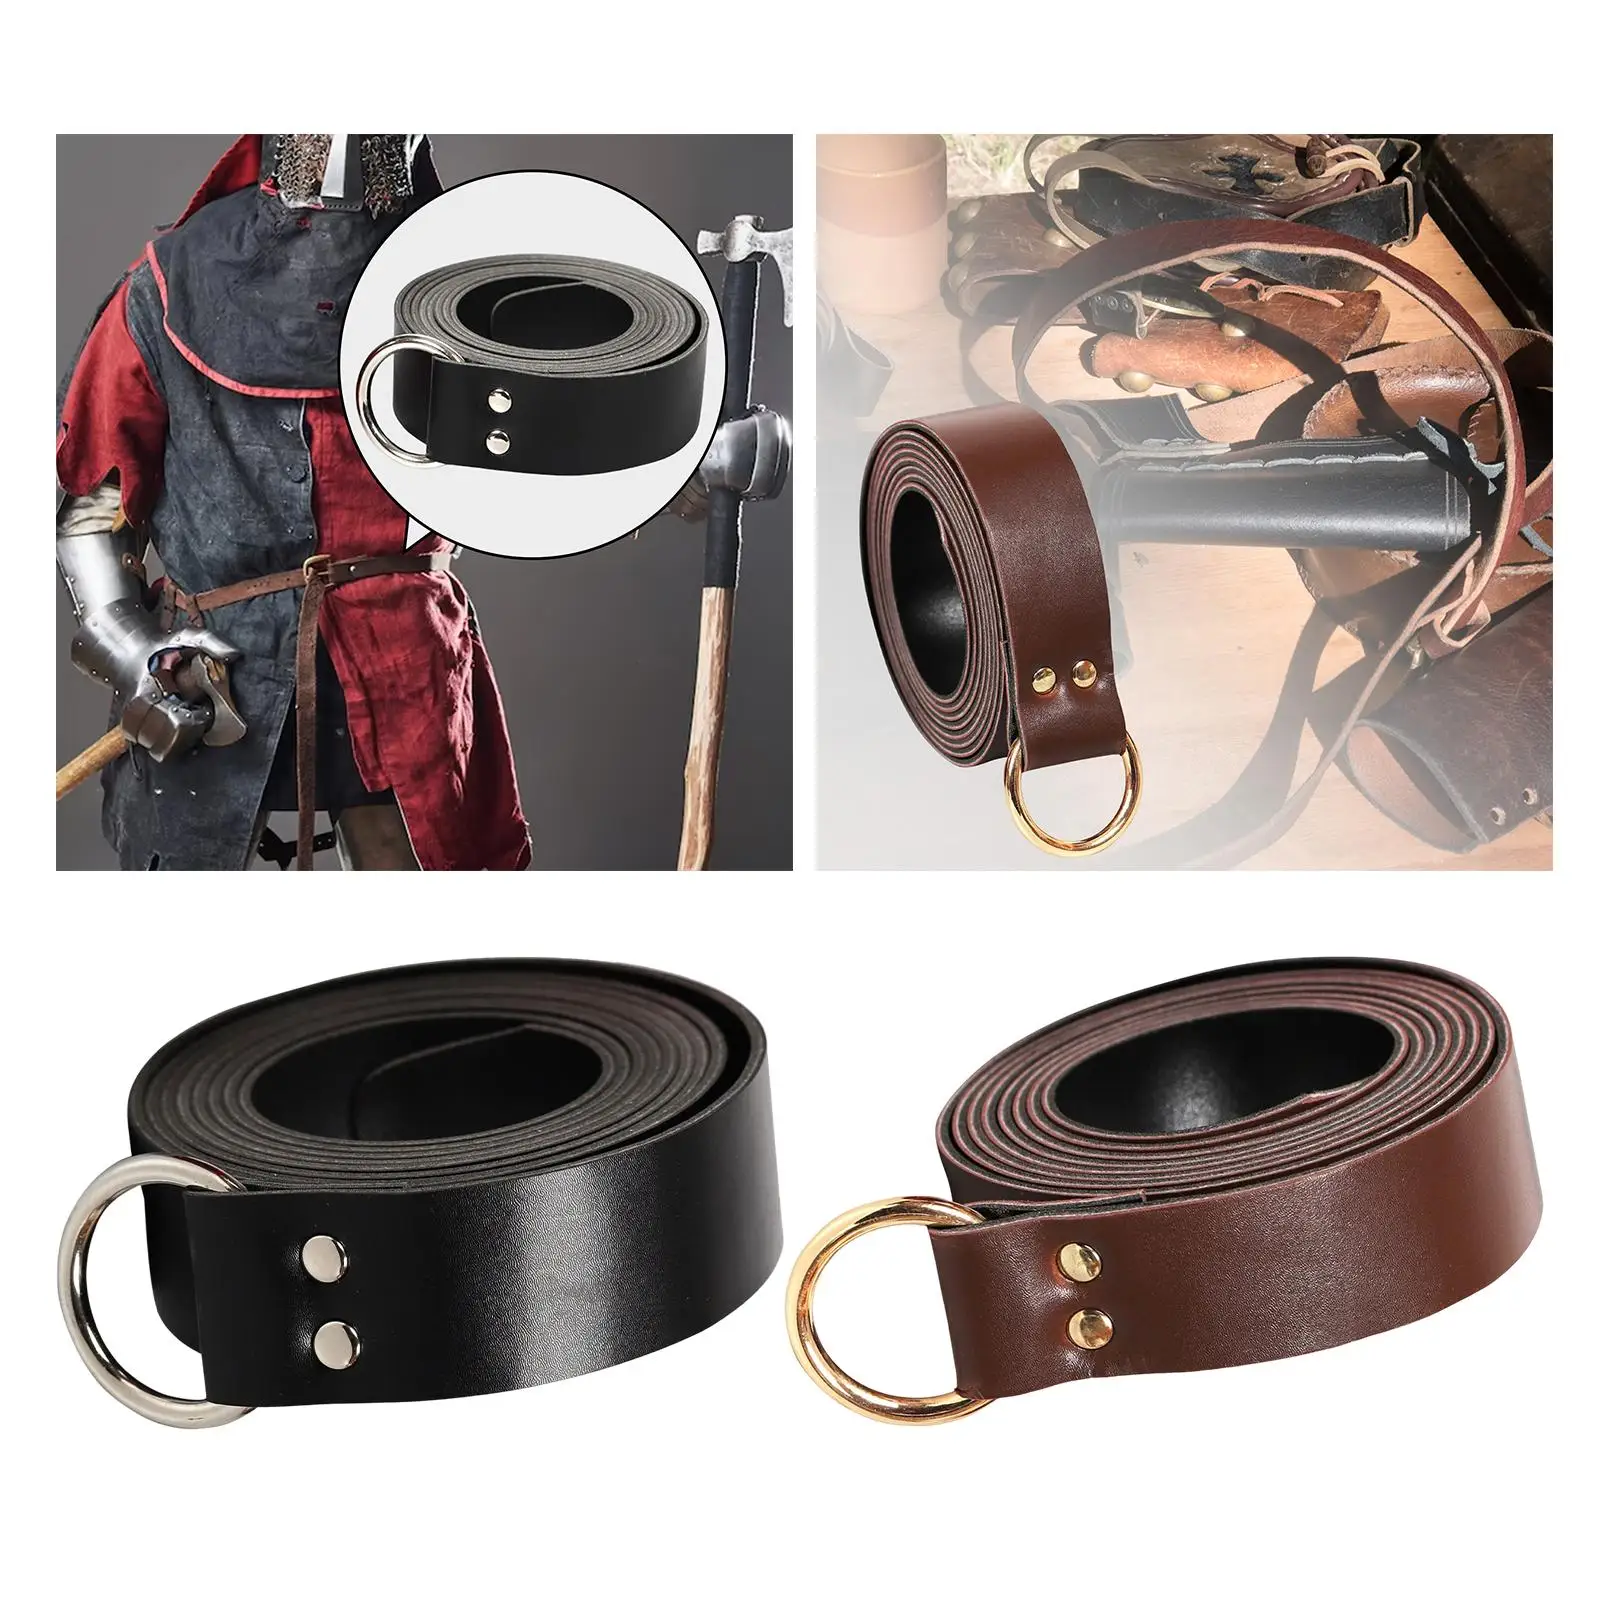 PU Leather Belt Wrap Around Adjustable Medieval Knight Waist Belt for Stage Props Costume Accessory Horseman Pants Jeans